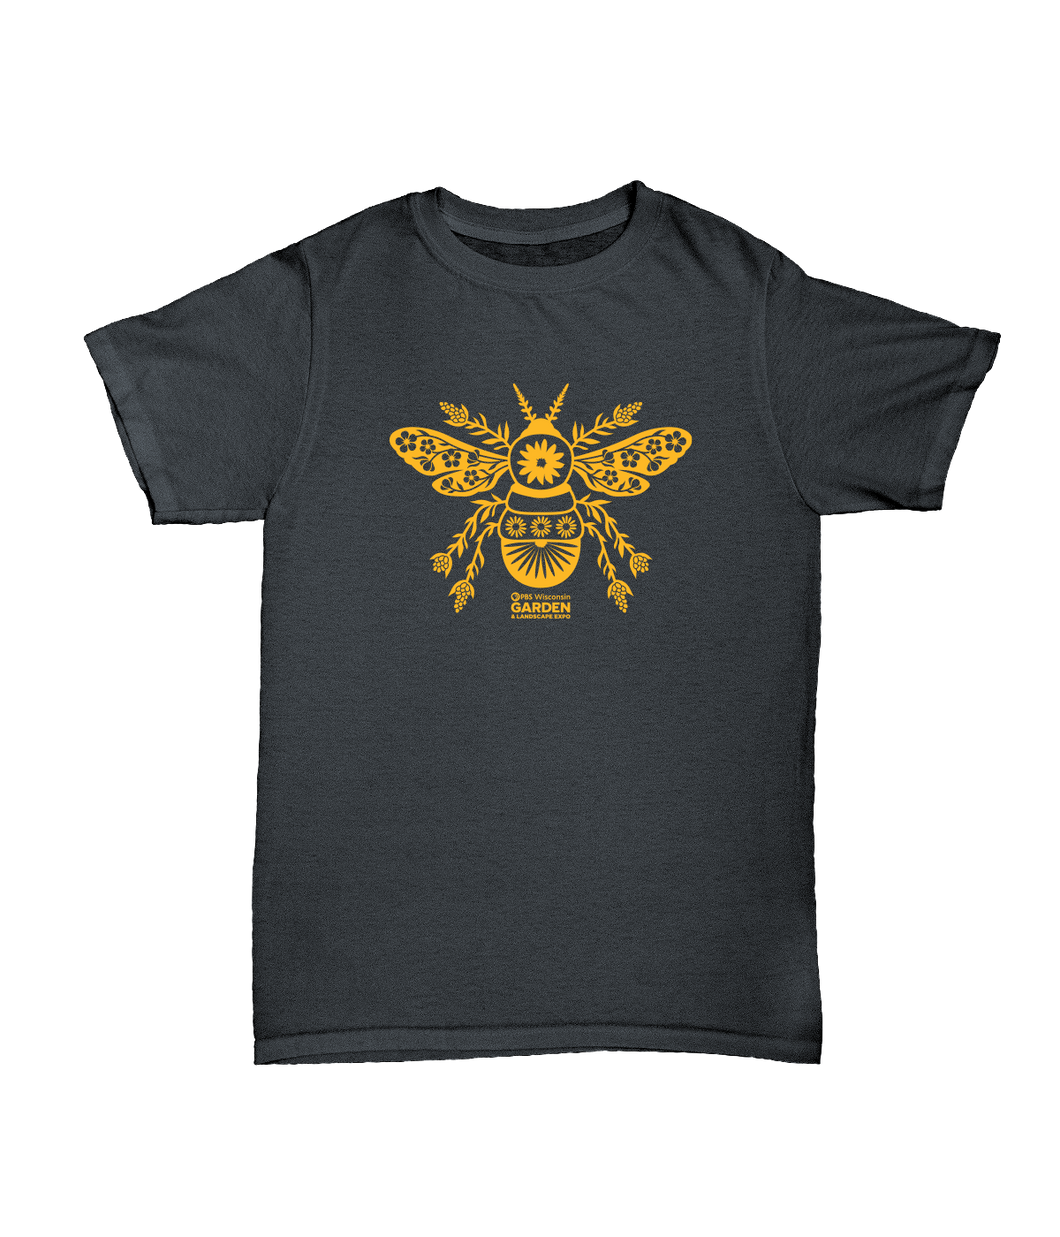 dark gray short sleeved crew neck t-shirt with gold stylized bee